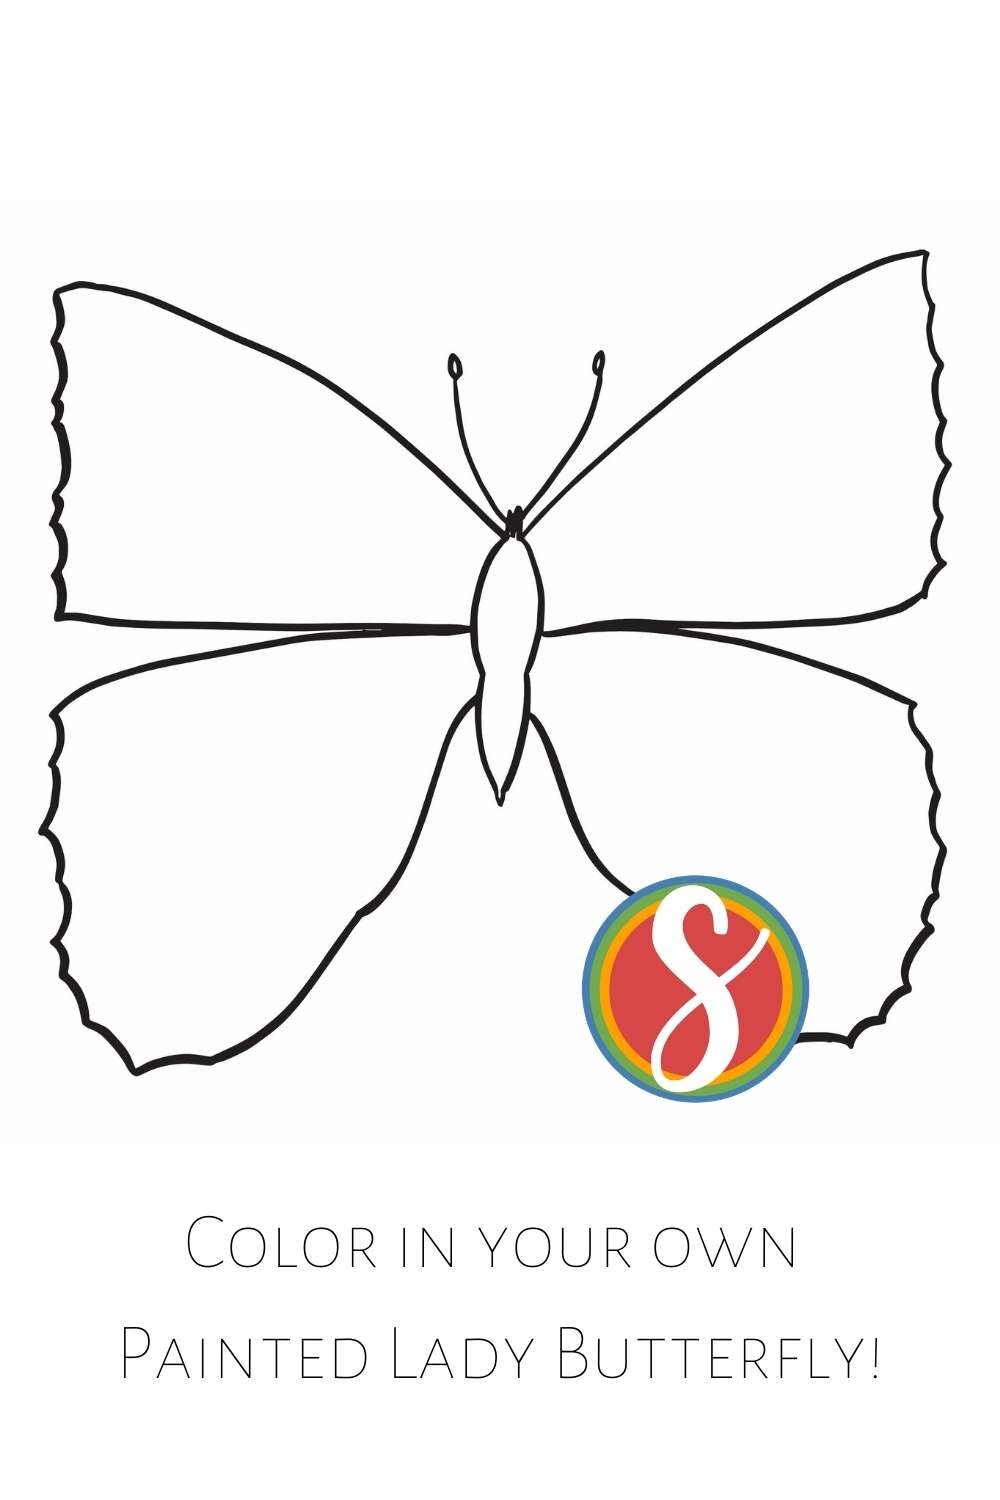 Color in your own painted lady butterfly! Fill it in and make him beautiful - free printable coloring page from Stevie Doodles